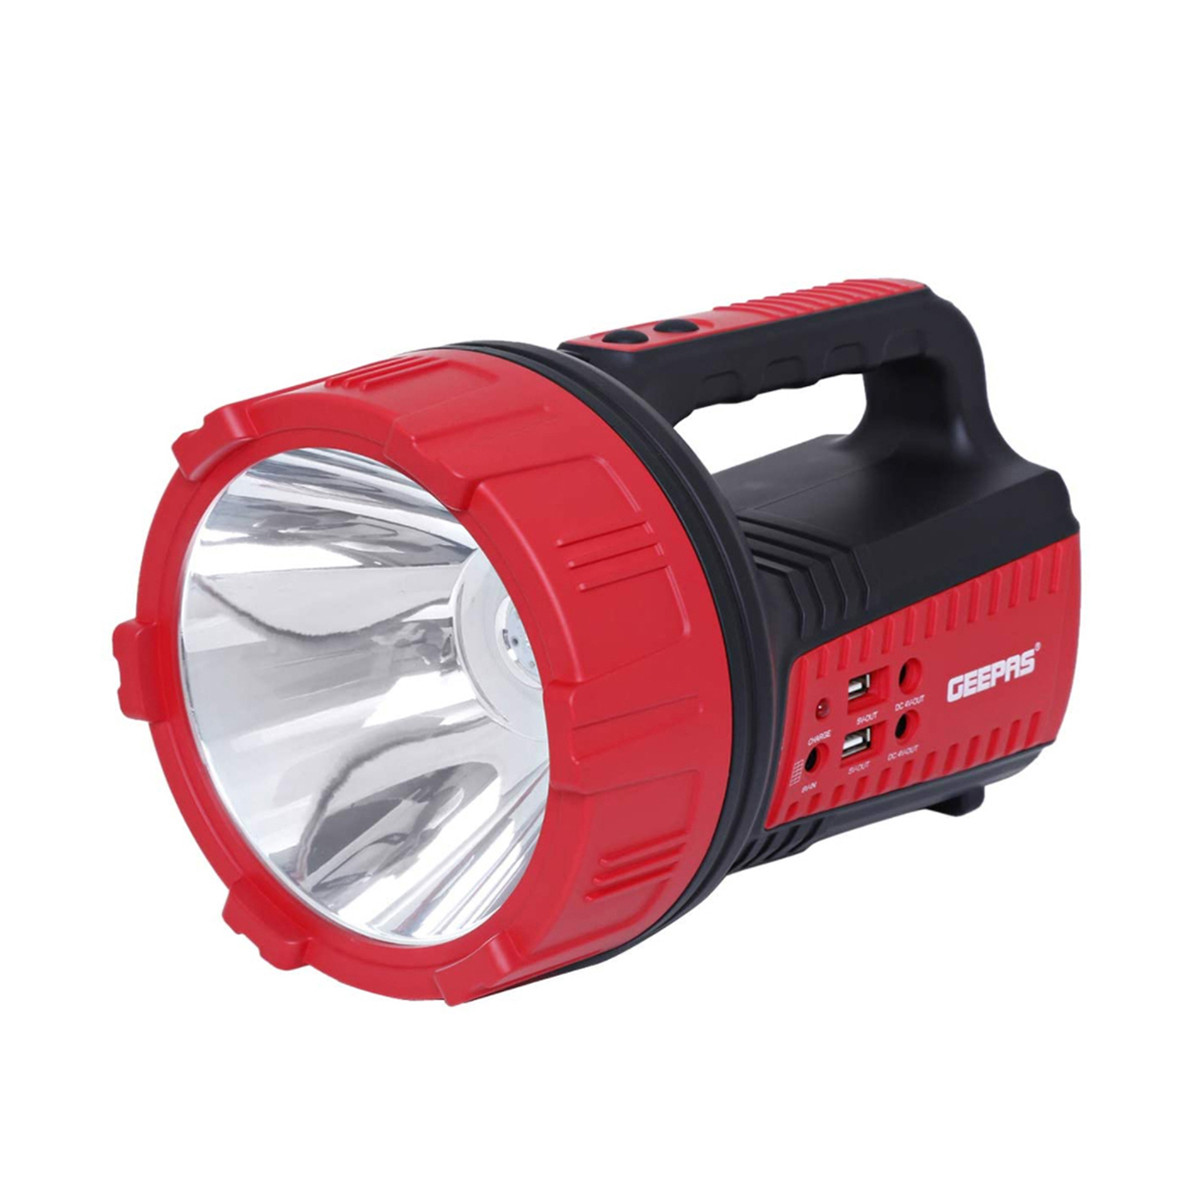 Geepas GSL5572 Rechargeable LED Search Light